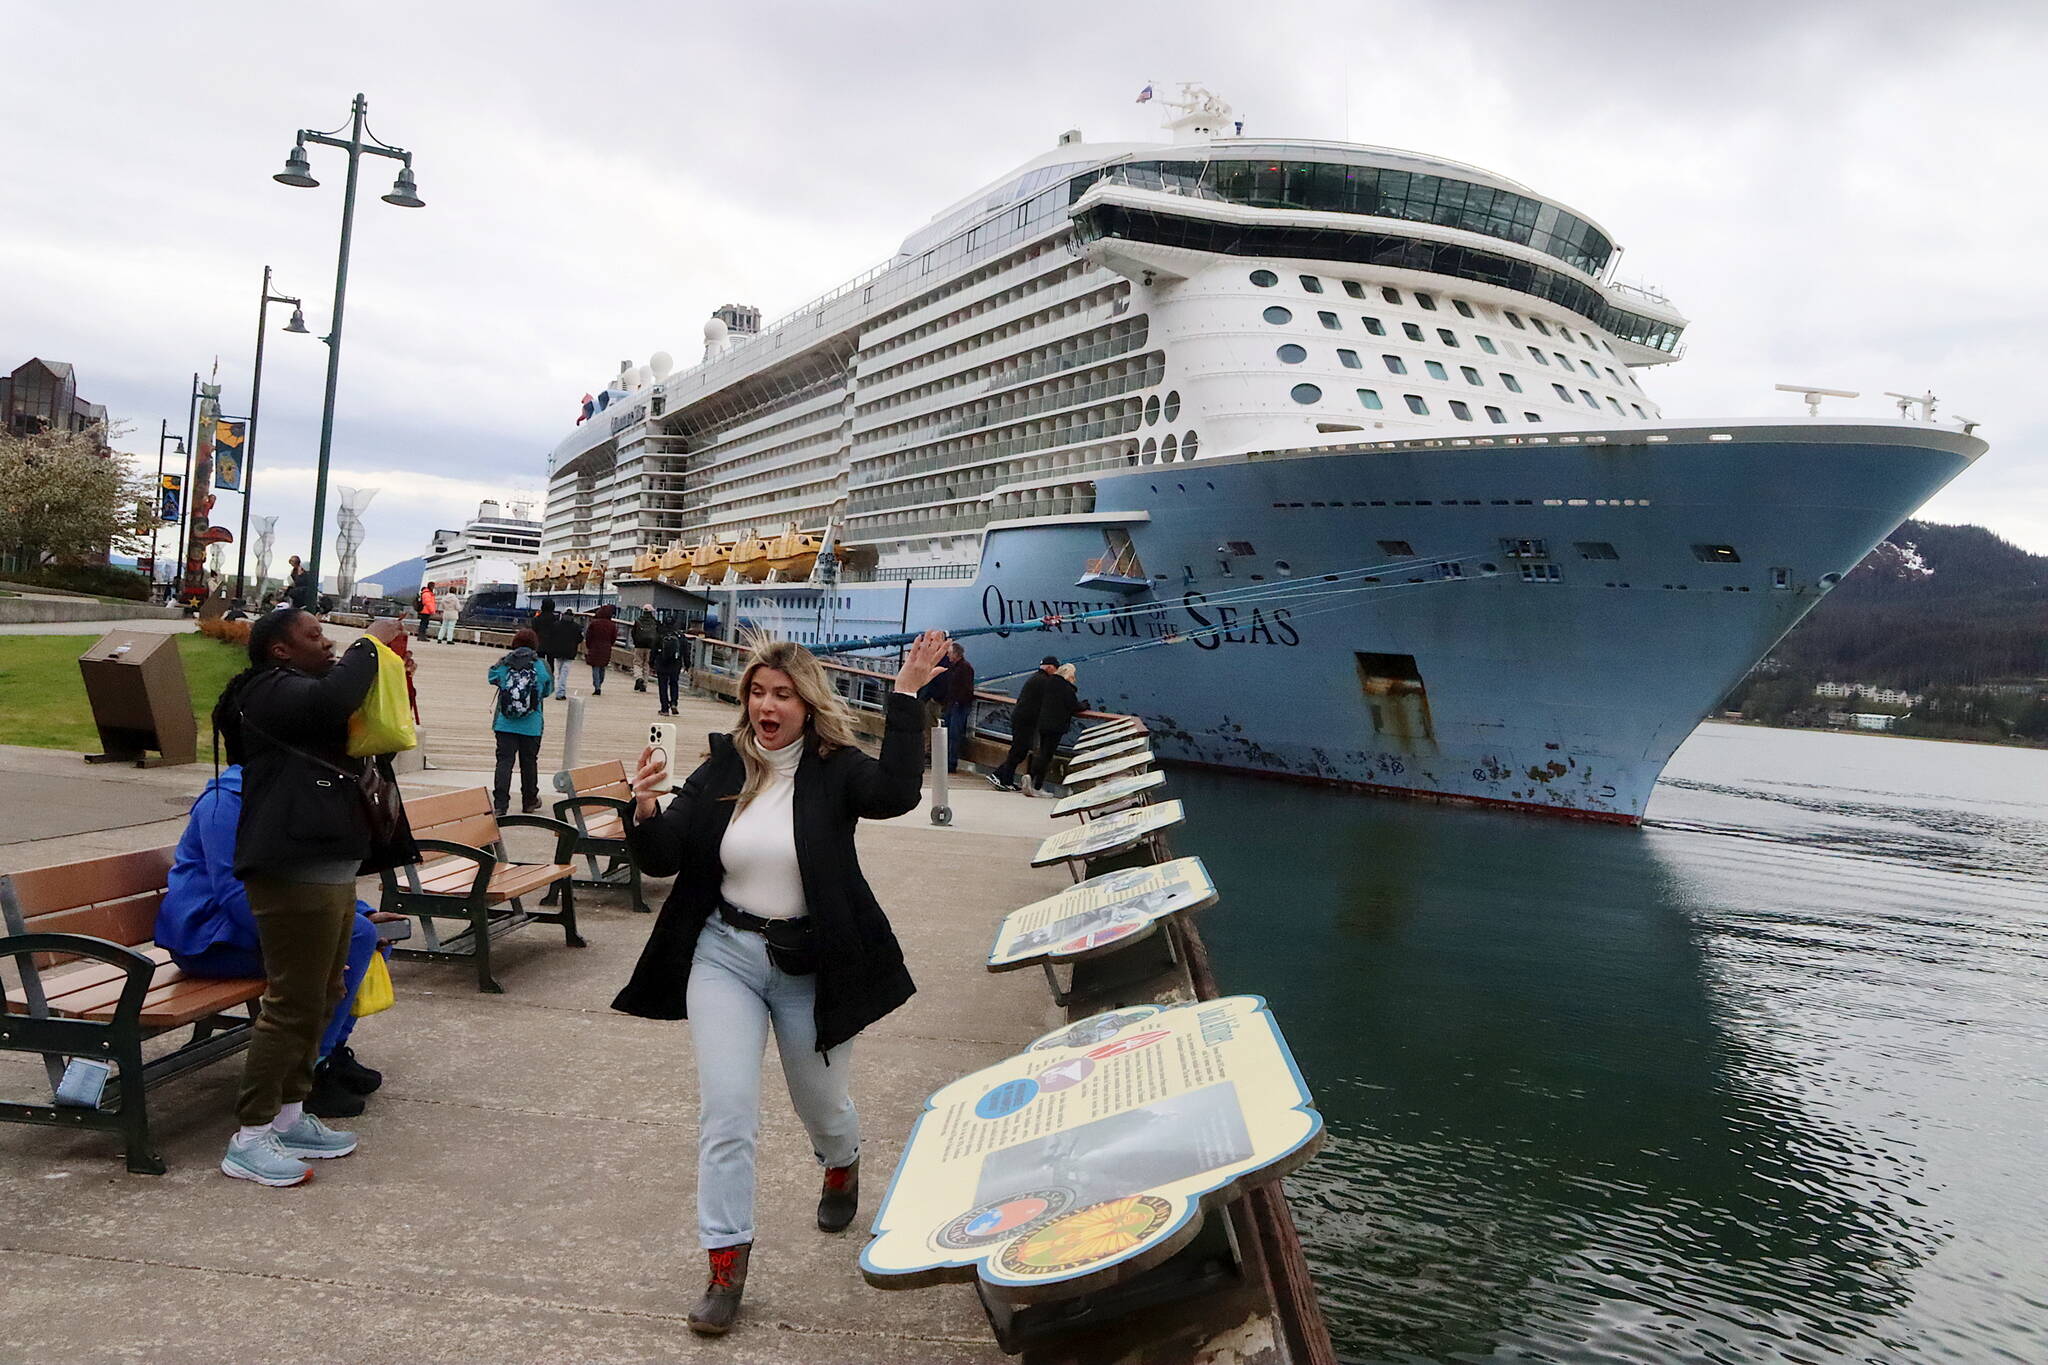 Jasmine Chavez, a crew member aboard the Quantum of the Seas cruise ship, waves to her family during a cell phone conversation after disembarking from the ship at Marine Park on Friday. (Mark Sabbatini / Juneau Empire)